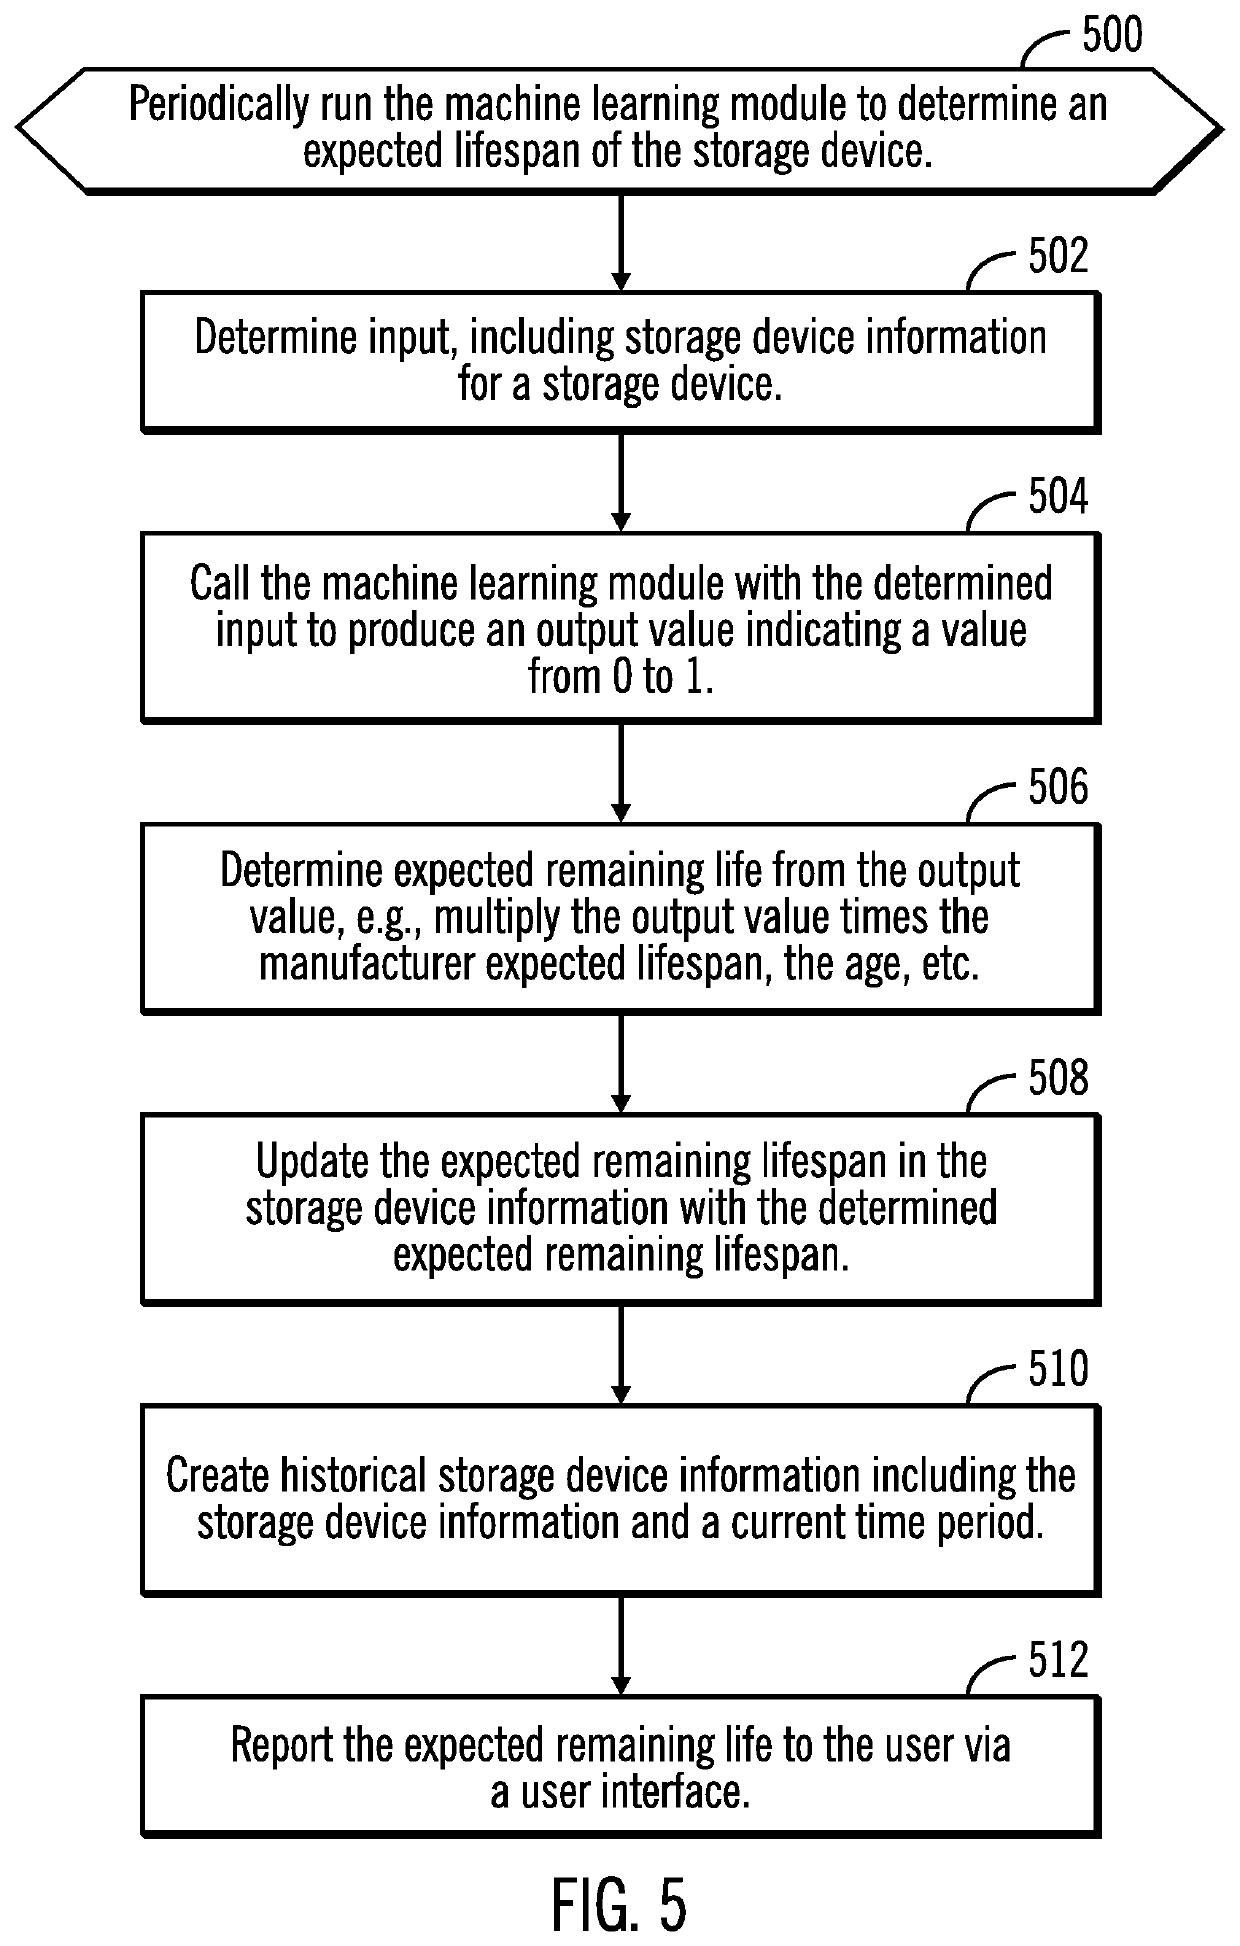 Determining when to replace a storage device using a machine learning module